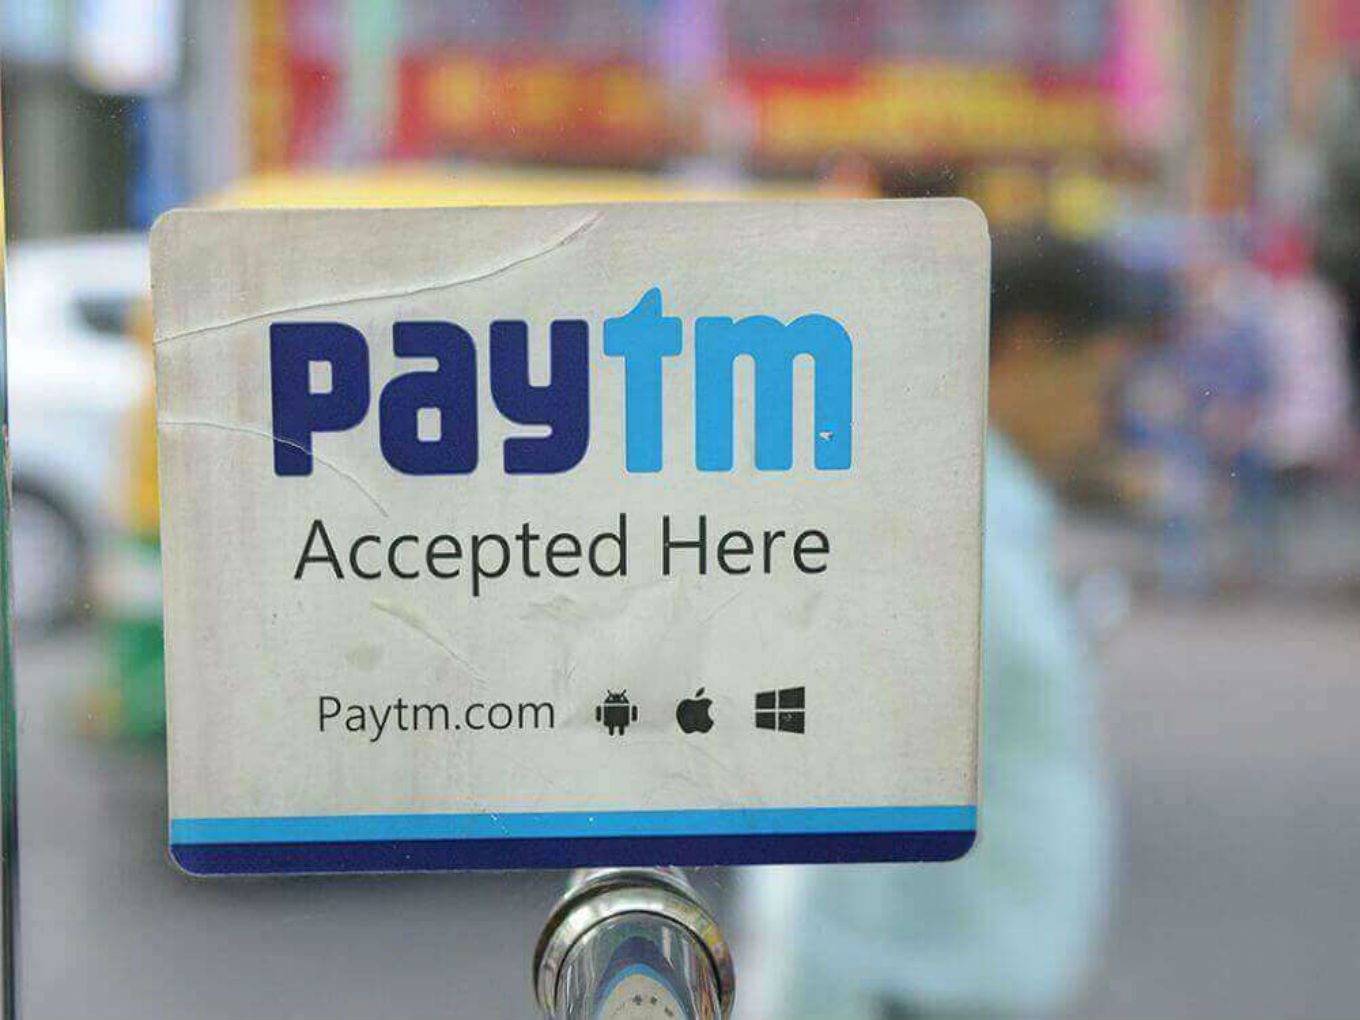 Over 50 Lakh Users Signed Up For Paytm MFs Before Its Launch